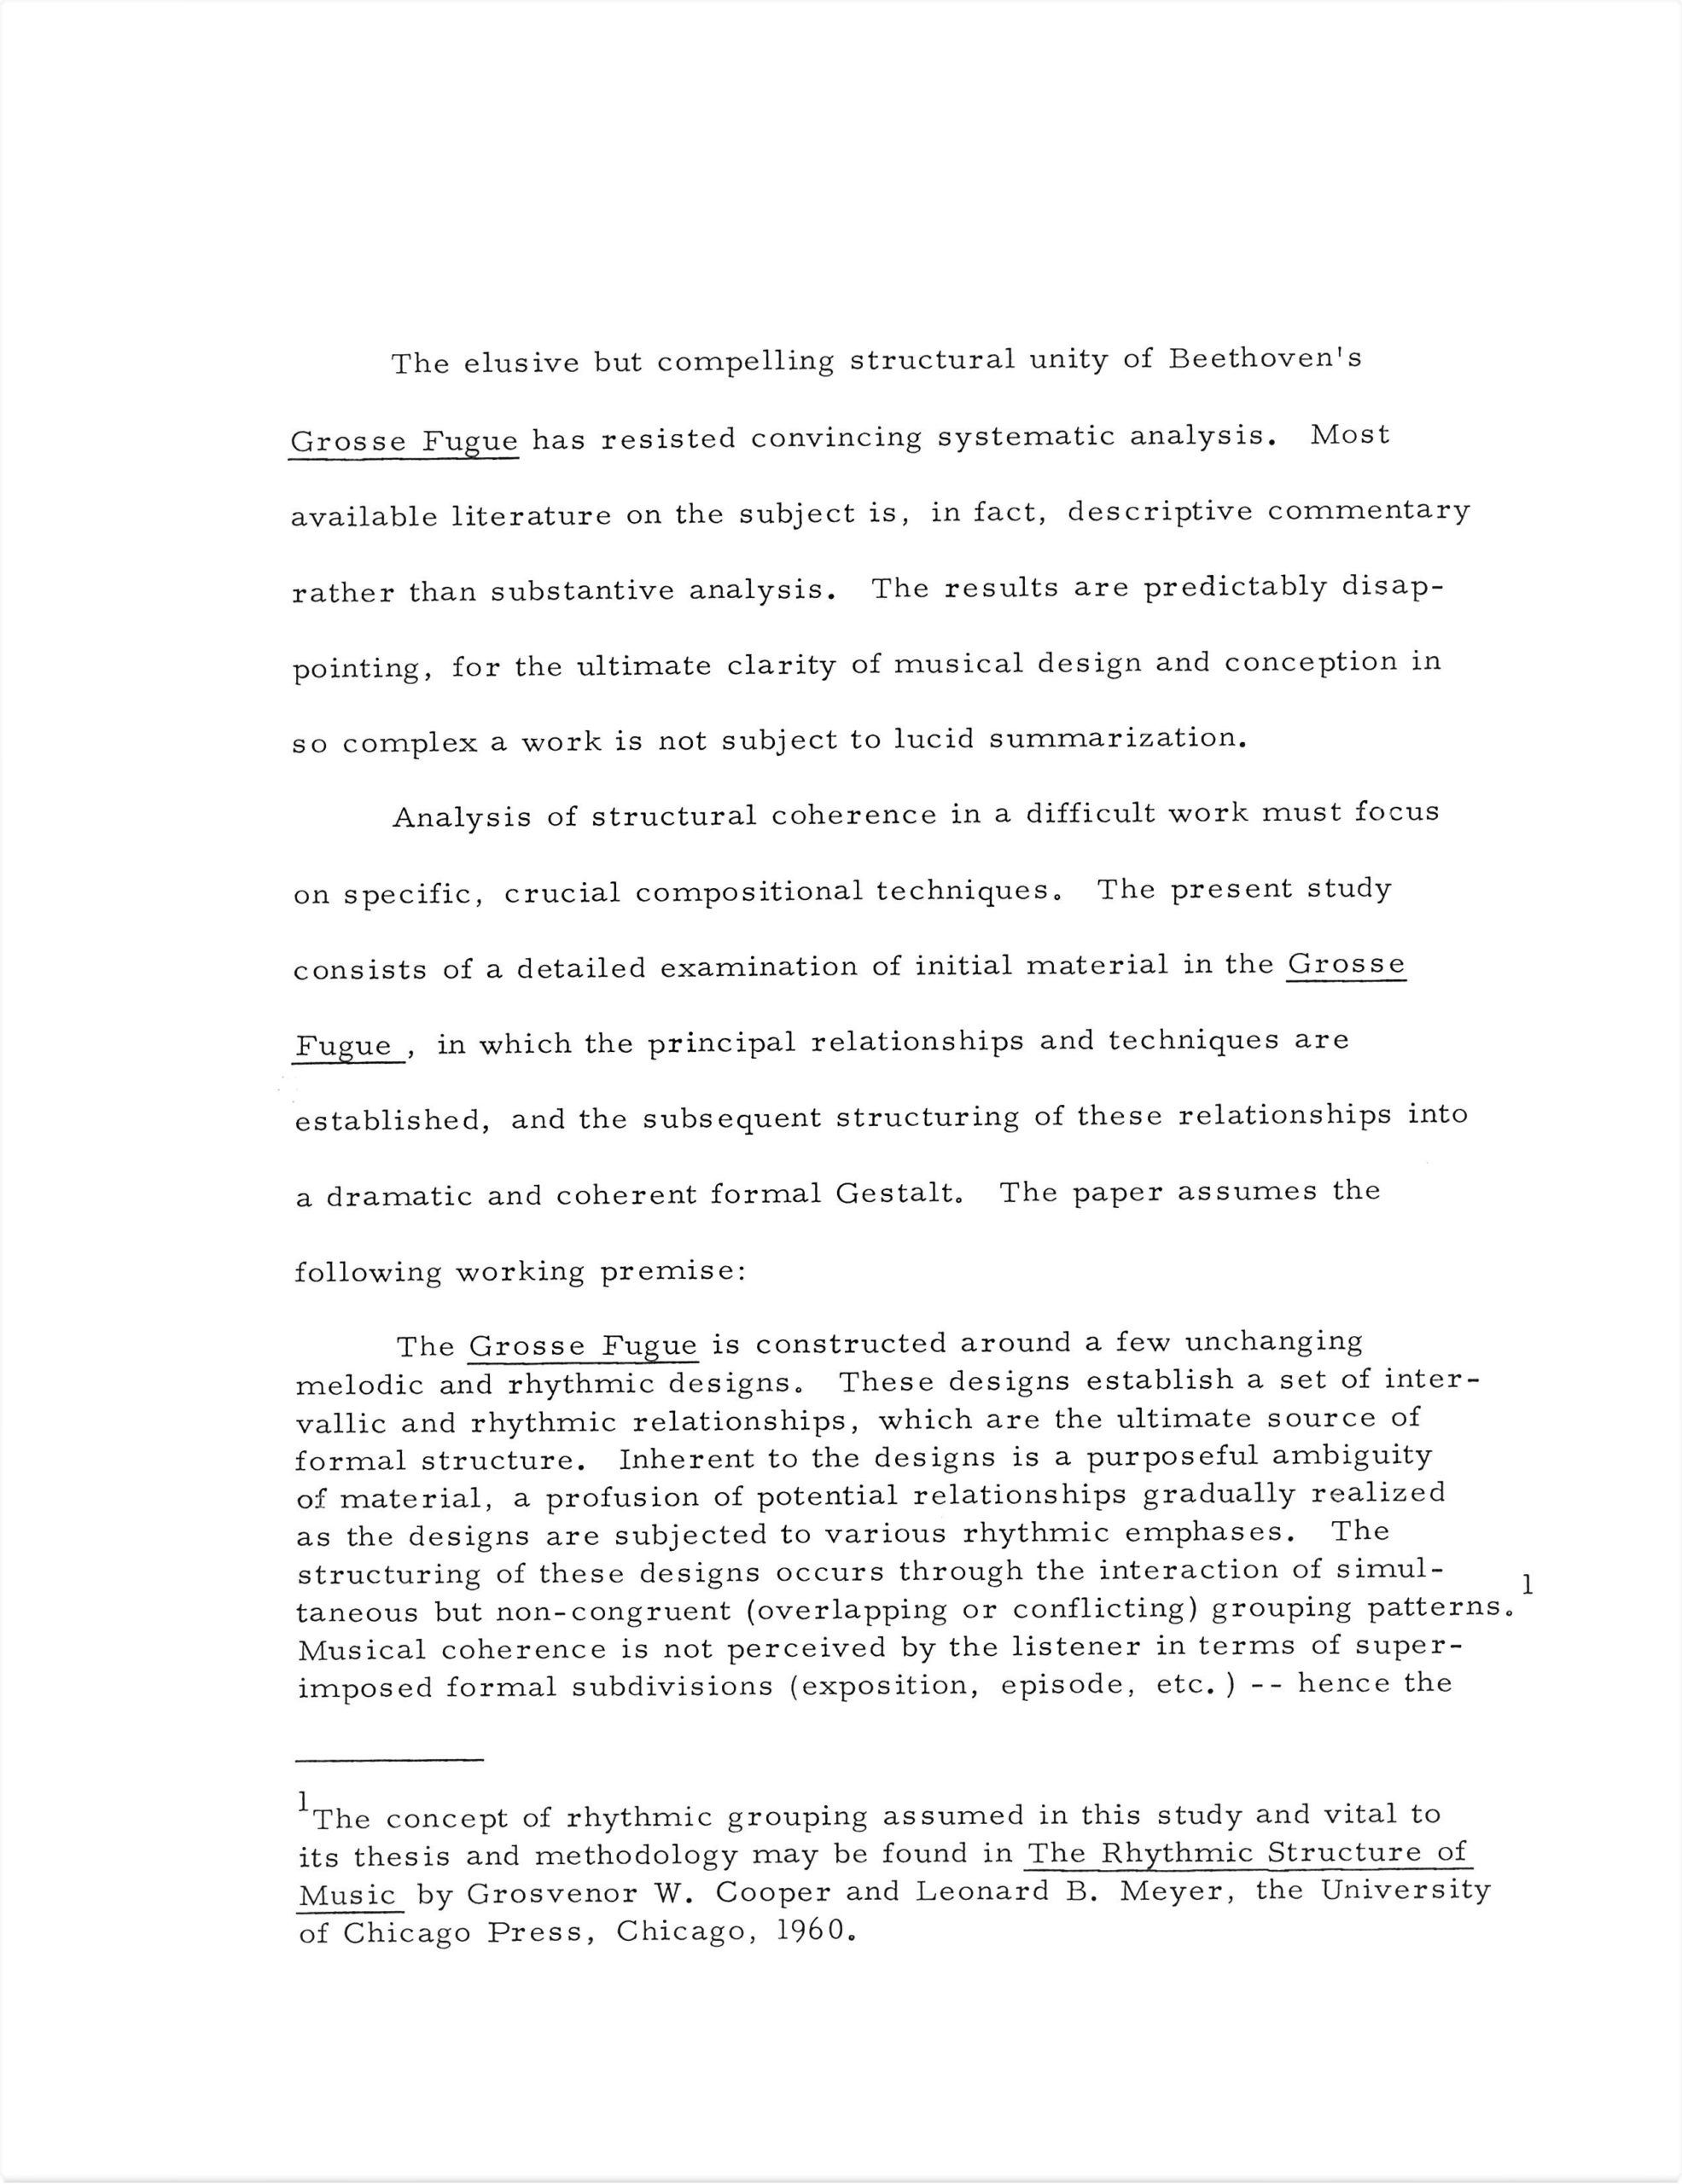 PhD paper (March 1972), page 1